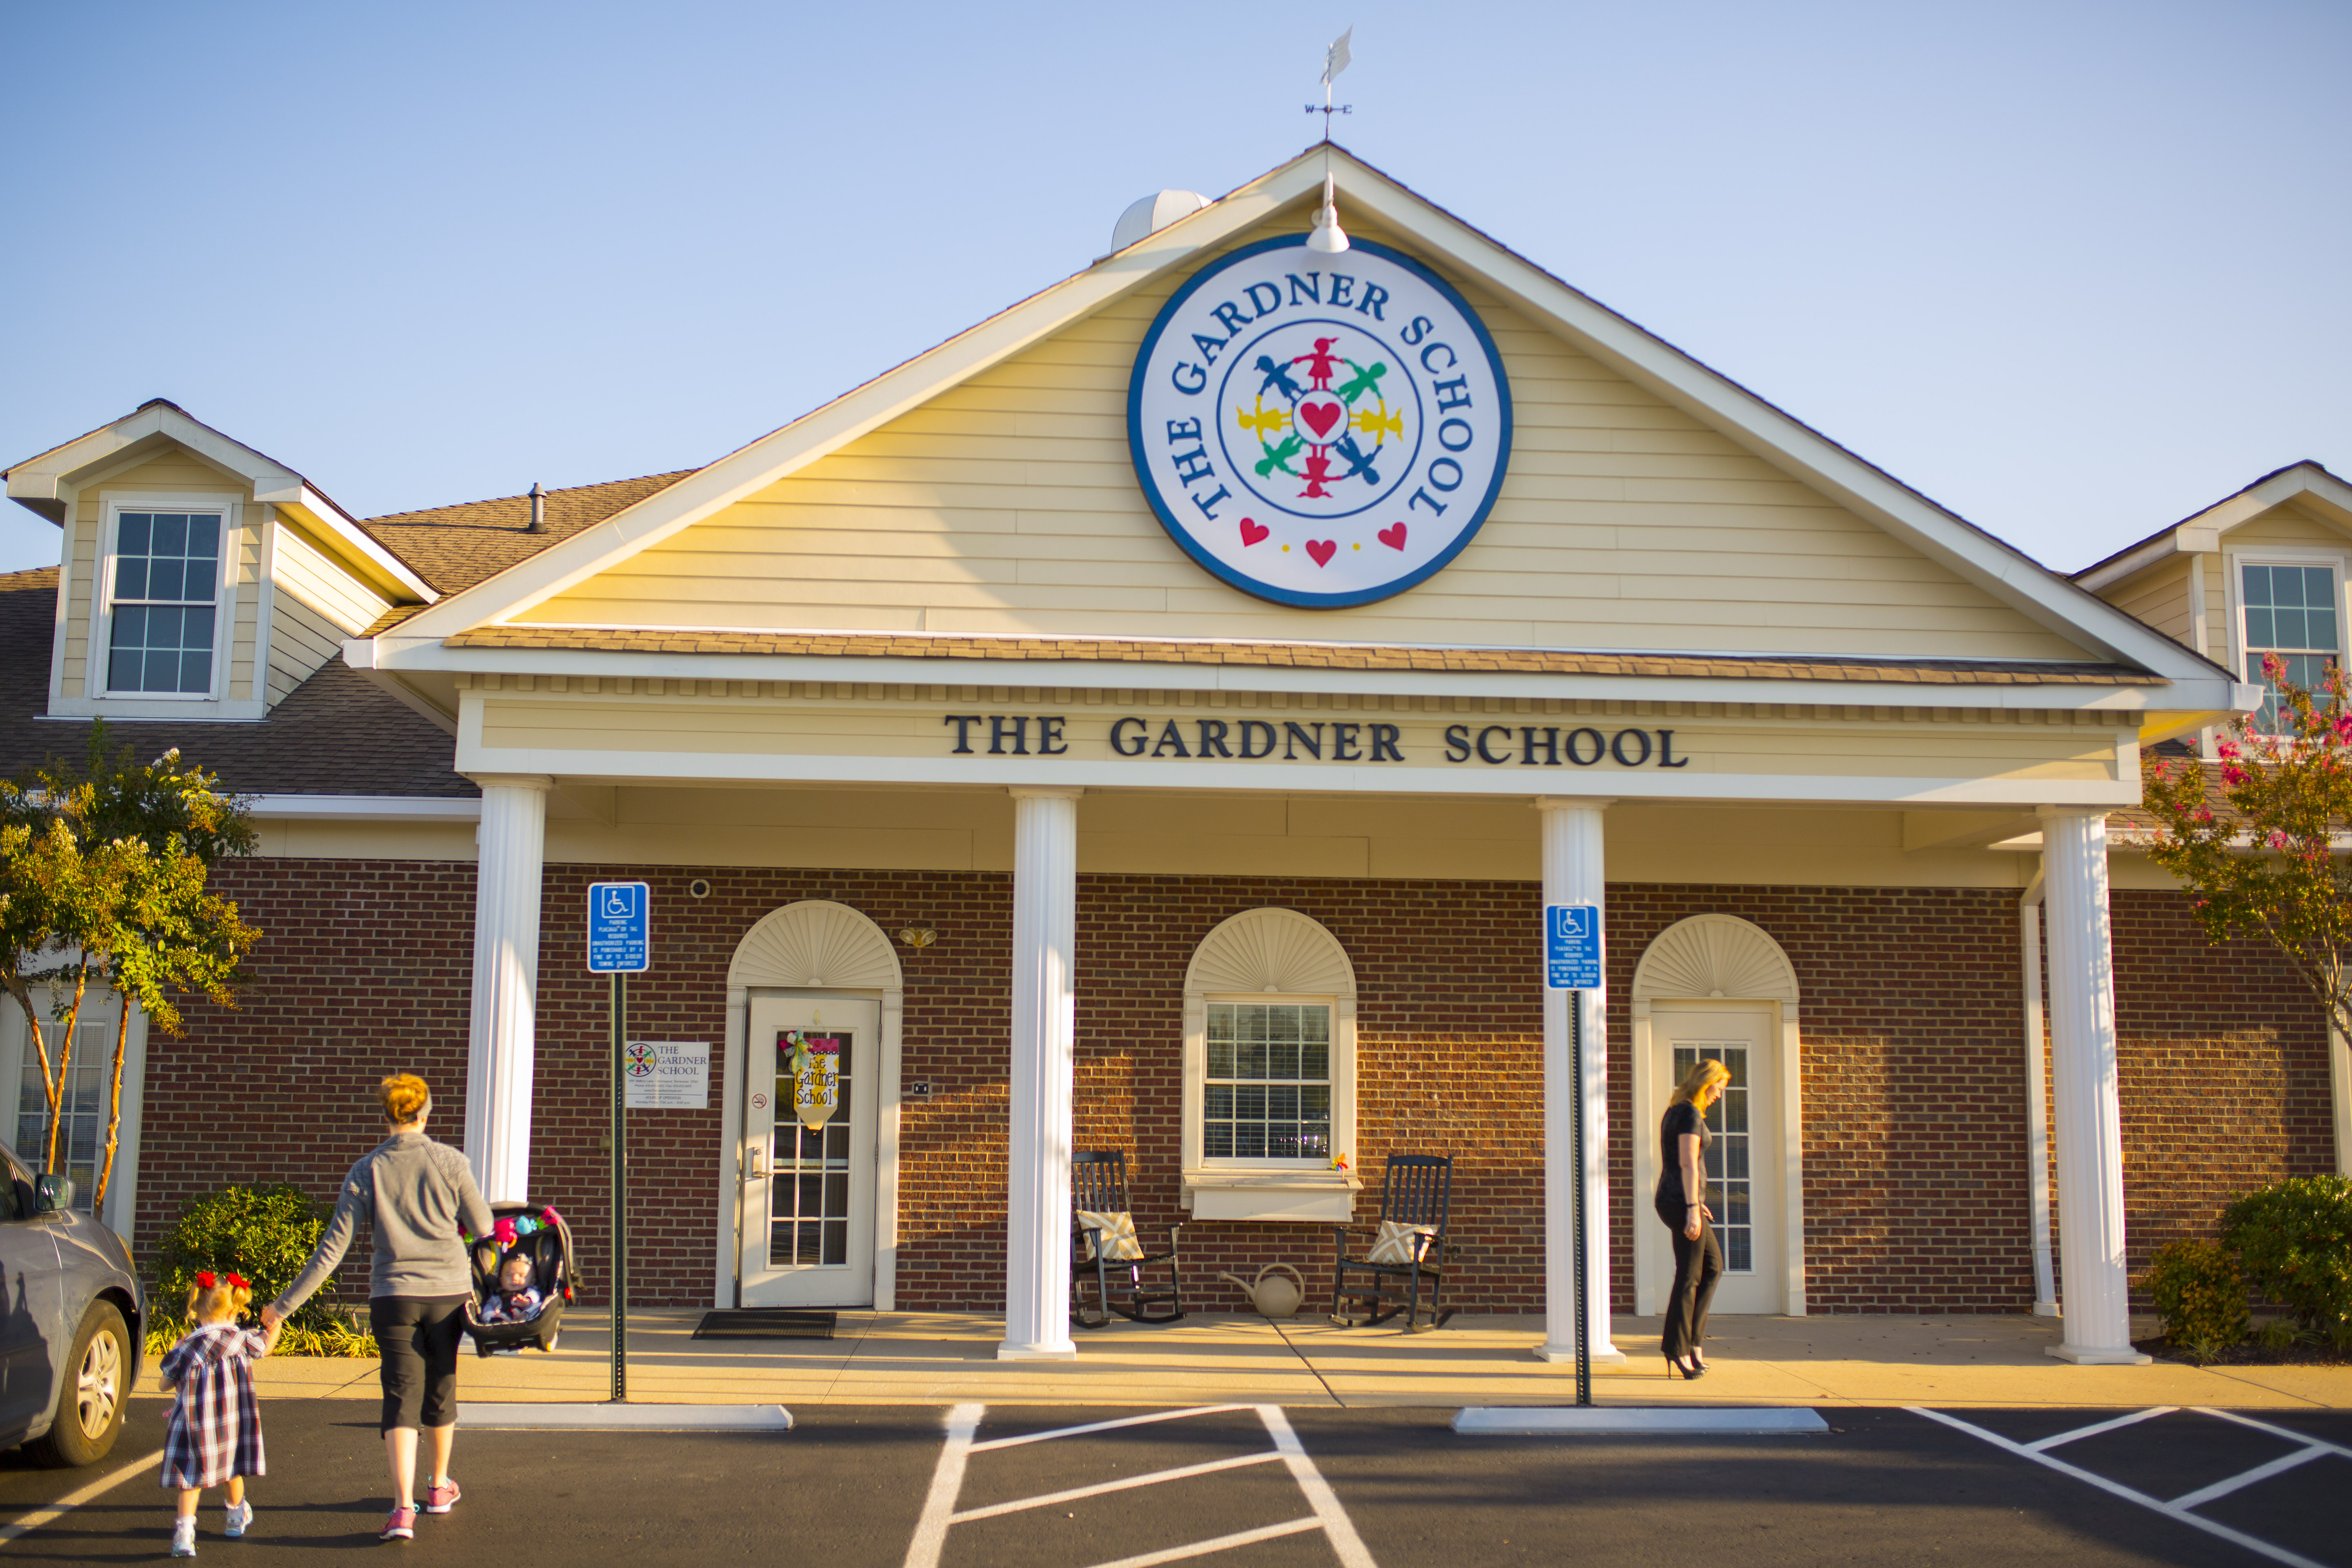 Outside of at The Gardner School